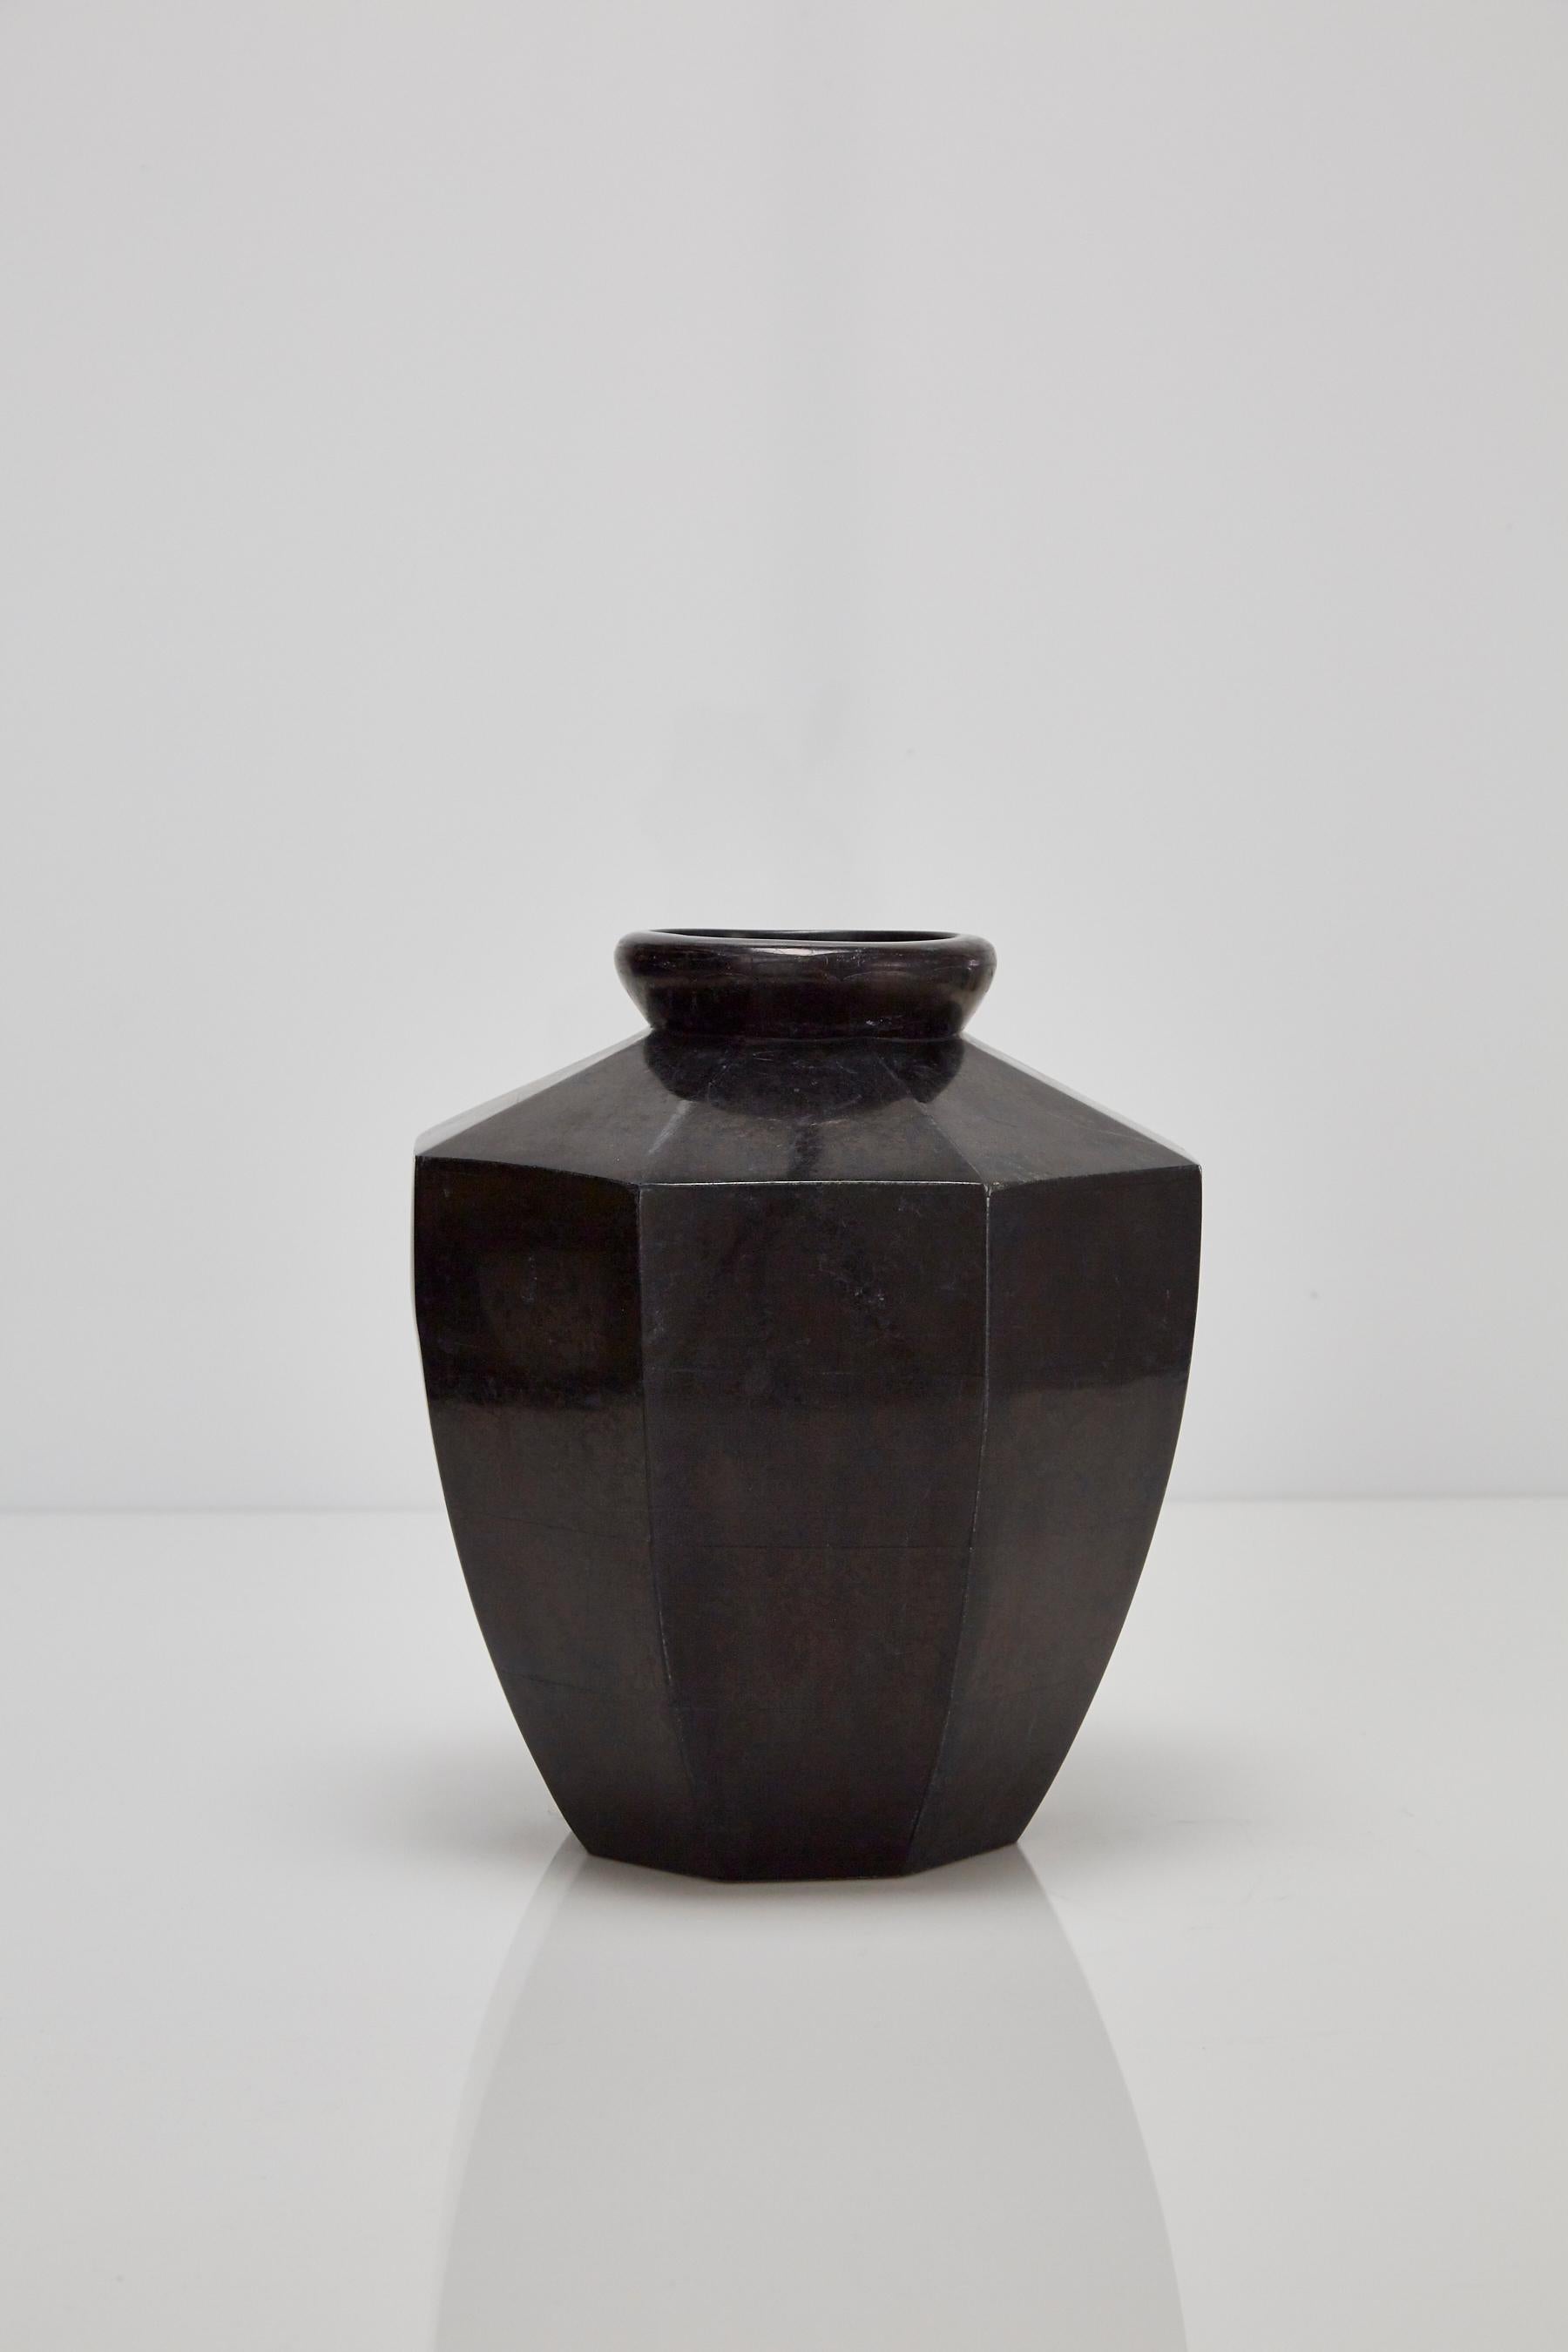 Short octagon flower vase executed in tessellated black stone over a fiberglass body.

All furnishings are made from 100% natural Fossil Stone or Seashell inlay, carefully hand cut and crafted piece-by-piece and precisely inlaid to the form of the